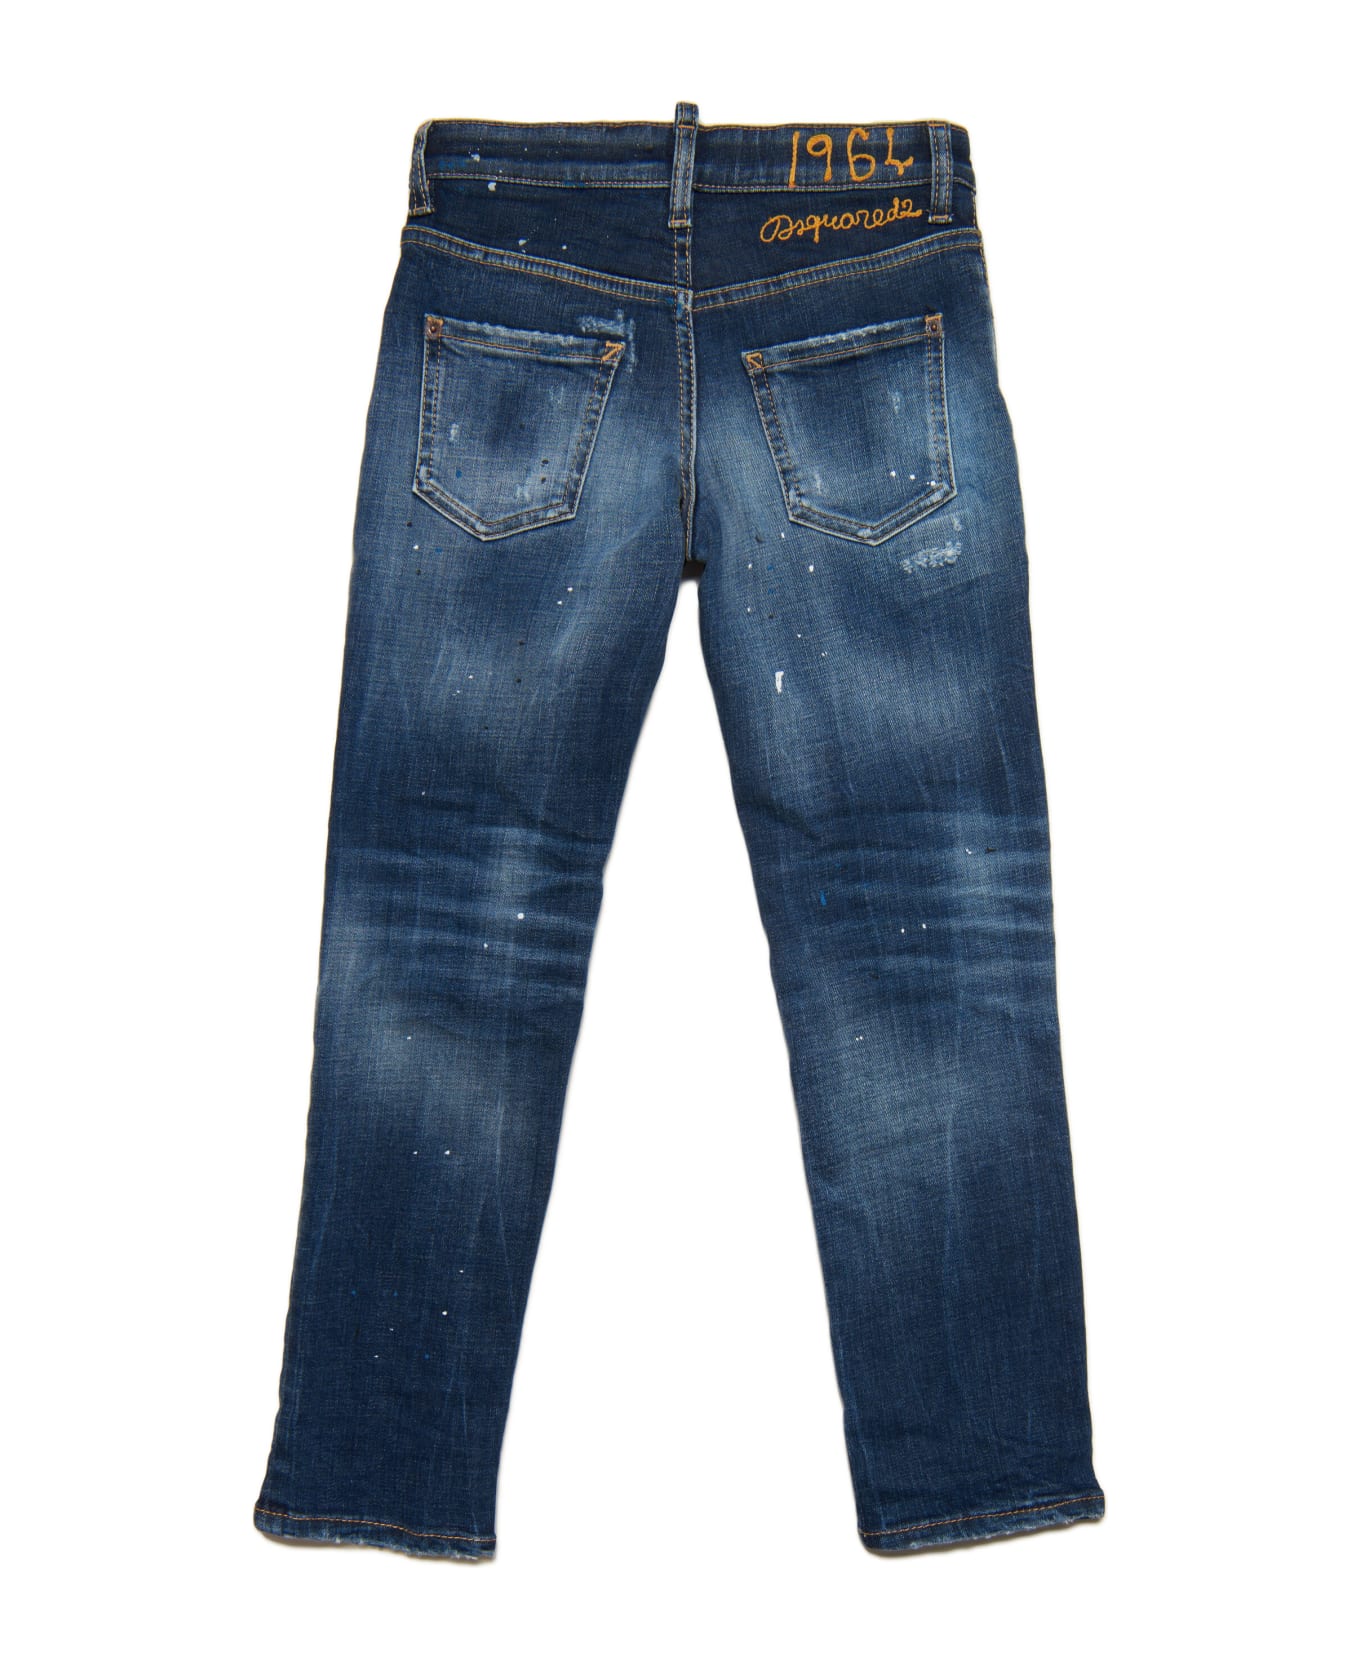 Dsquared2 D2p438u Stanislav Jean Trousers Dsquared Stanislav Jeans Straight Medium Blue Shaded With Breaks And Patches - Blue Denim